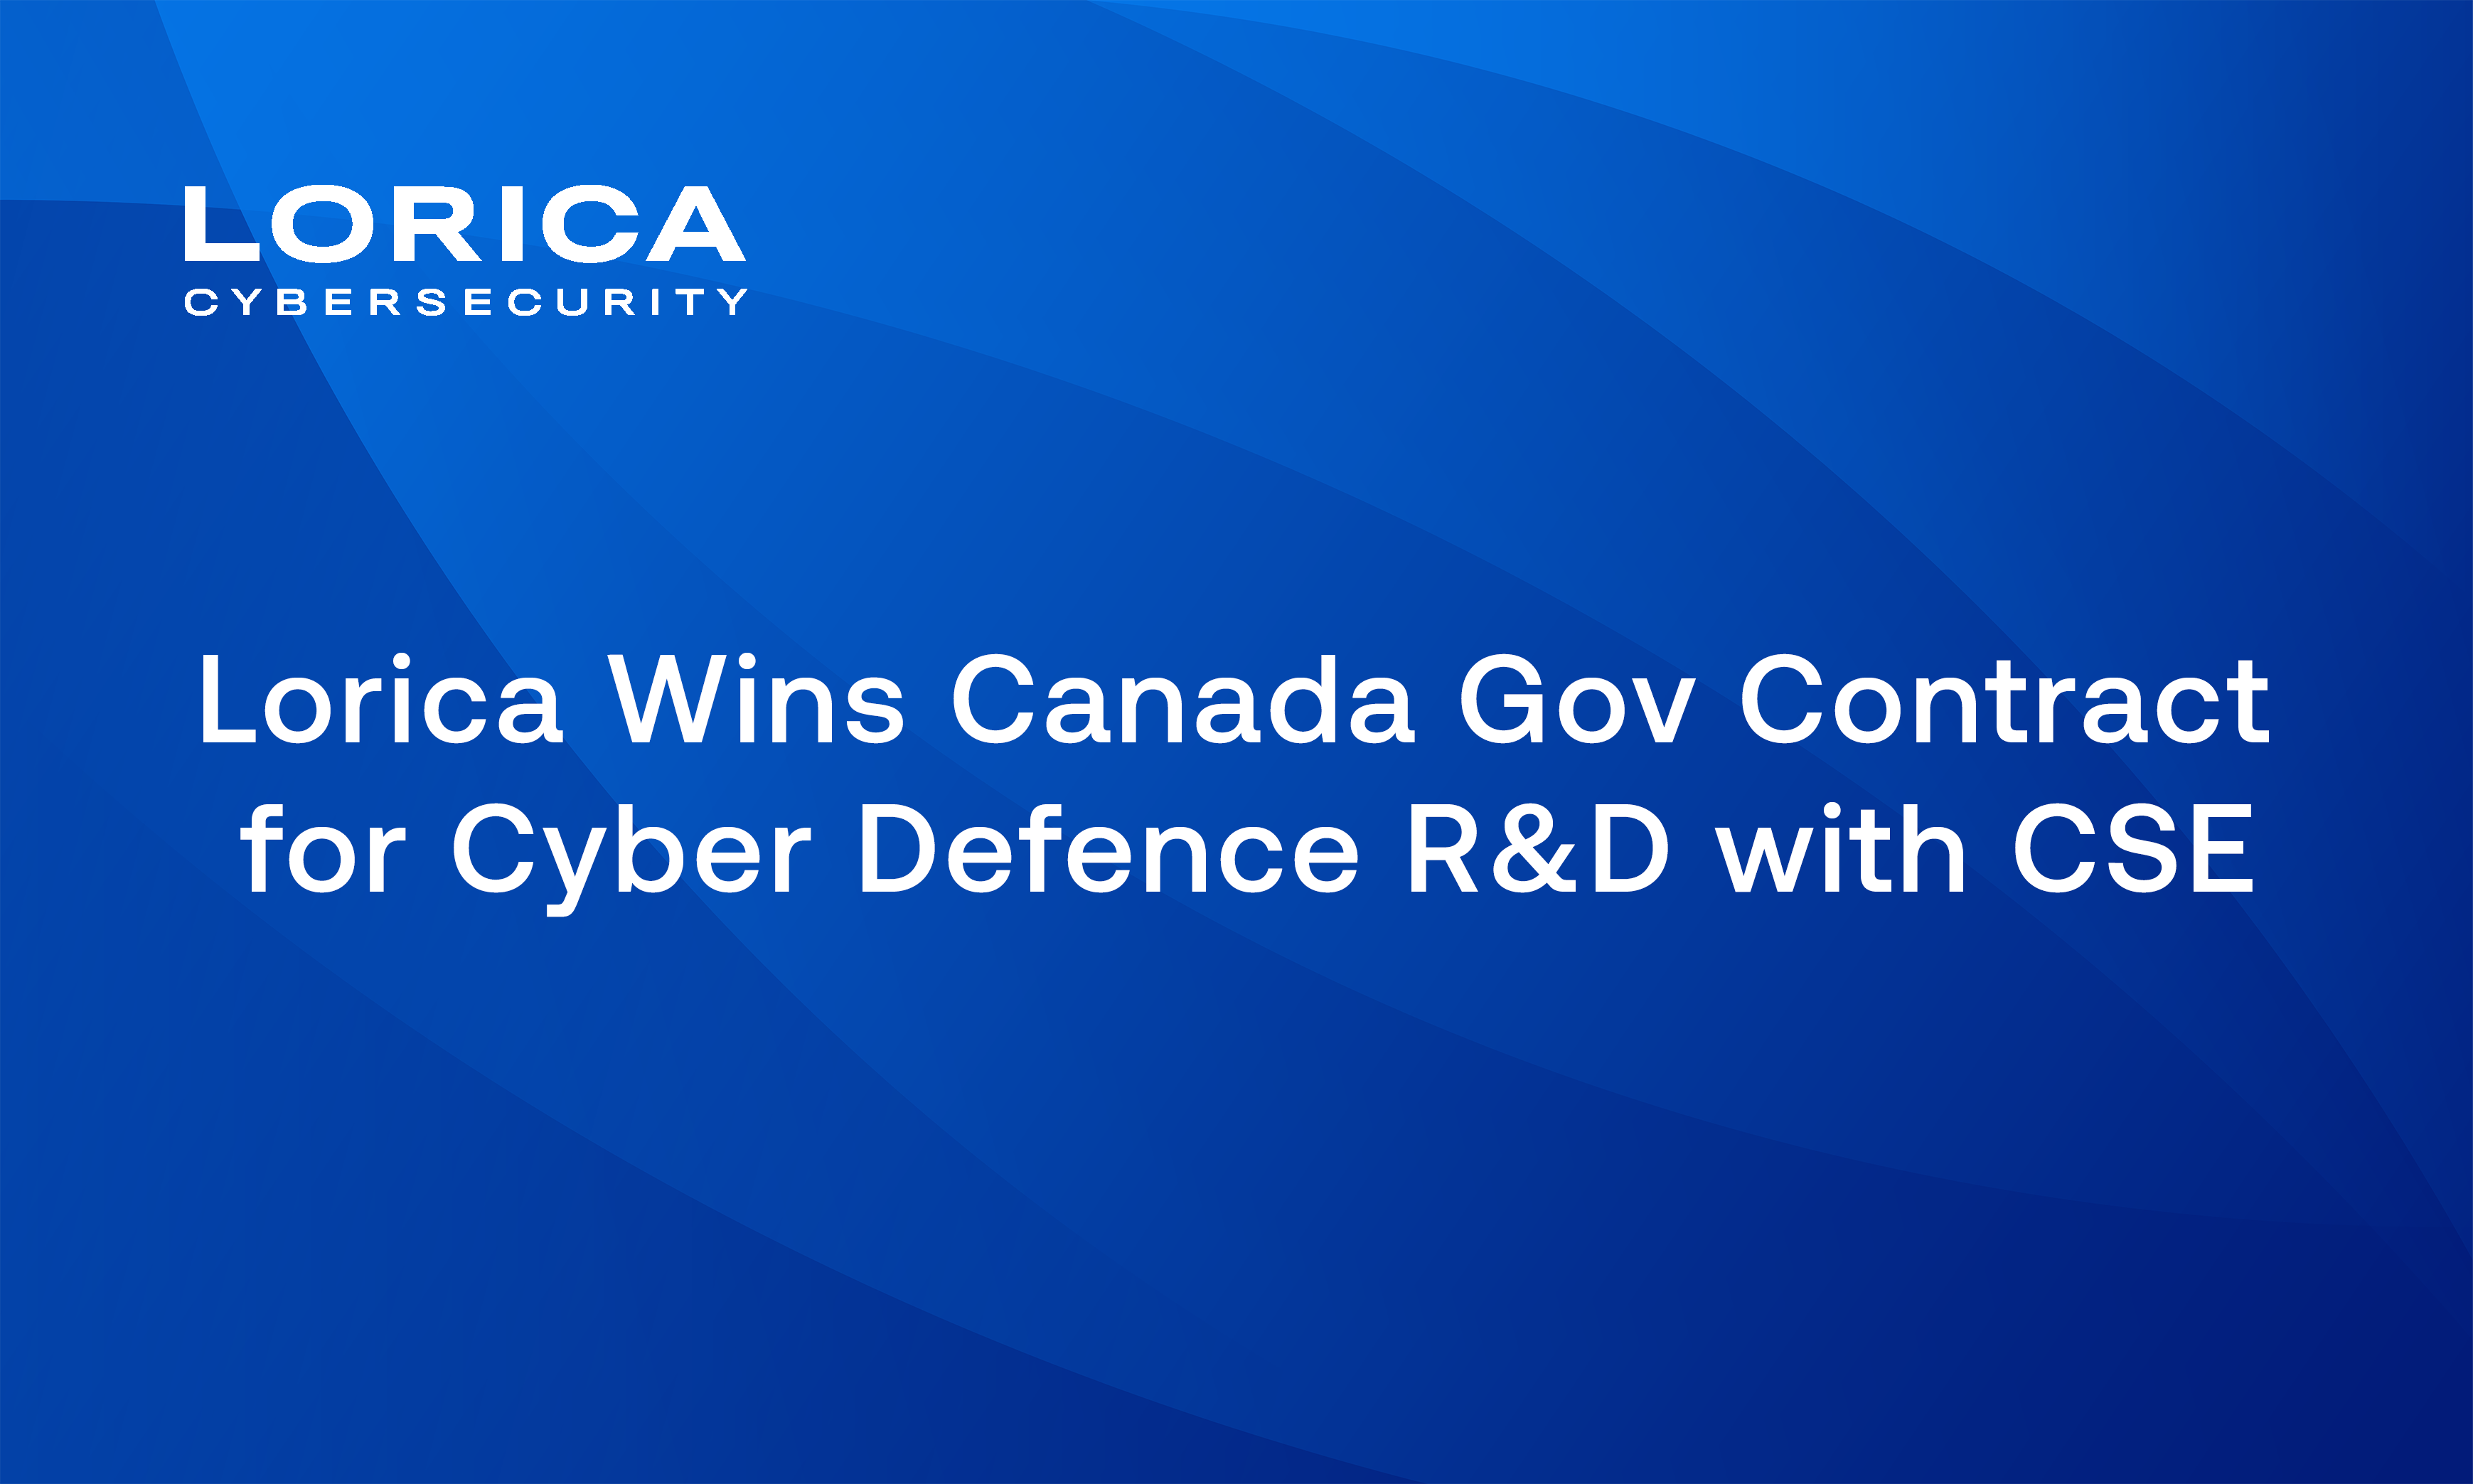 Lorica Wins Canada Gov Contract for Cyber Defence R&D with CSE